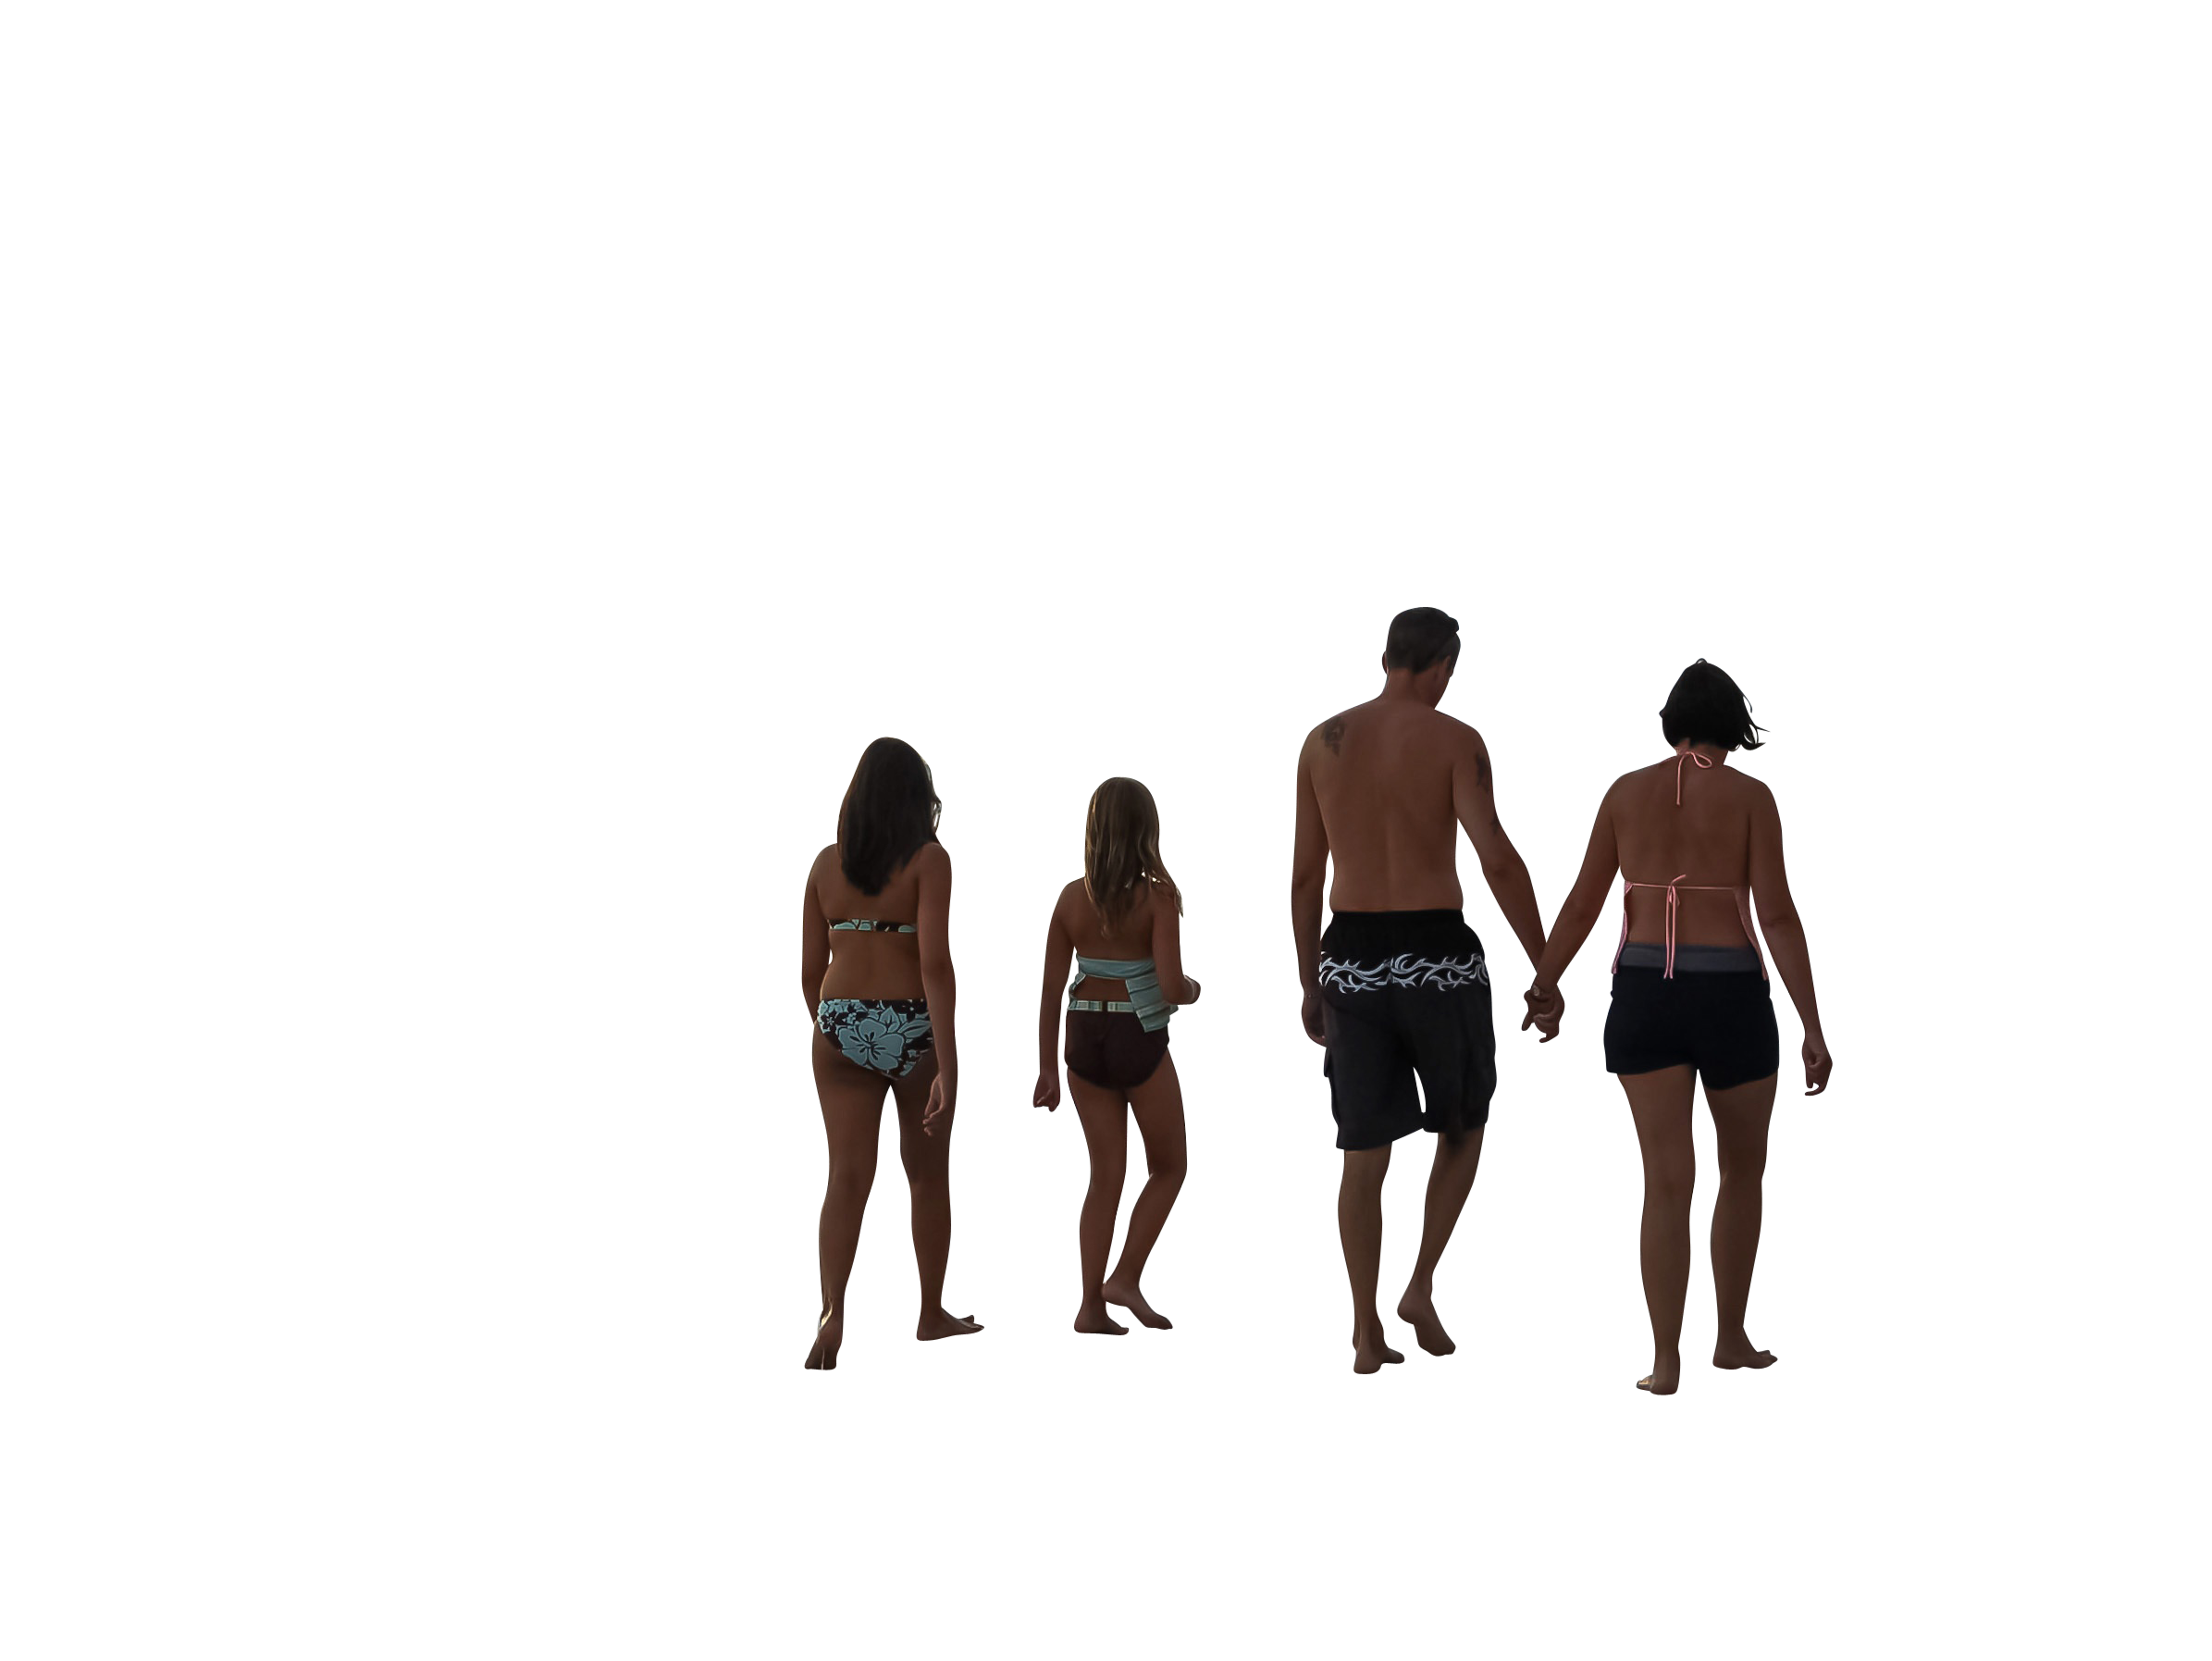 A Group Of People In Swimsuits Walking